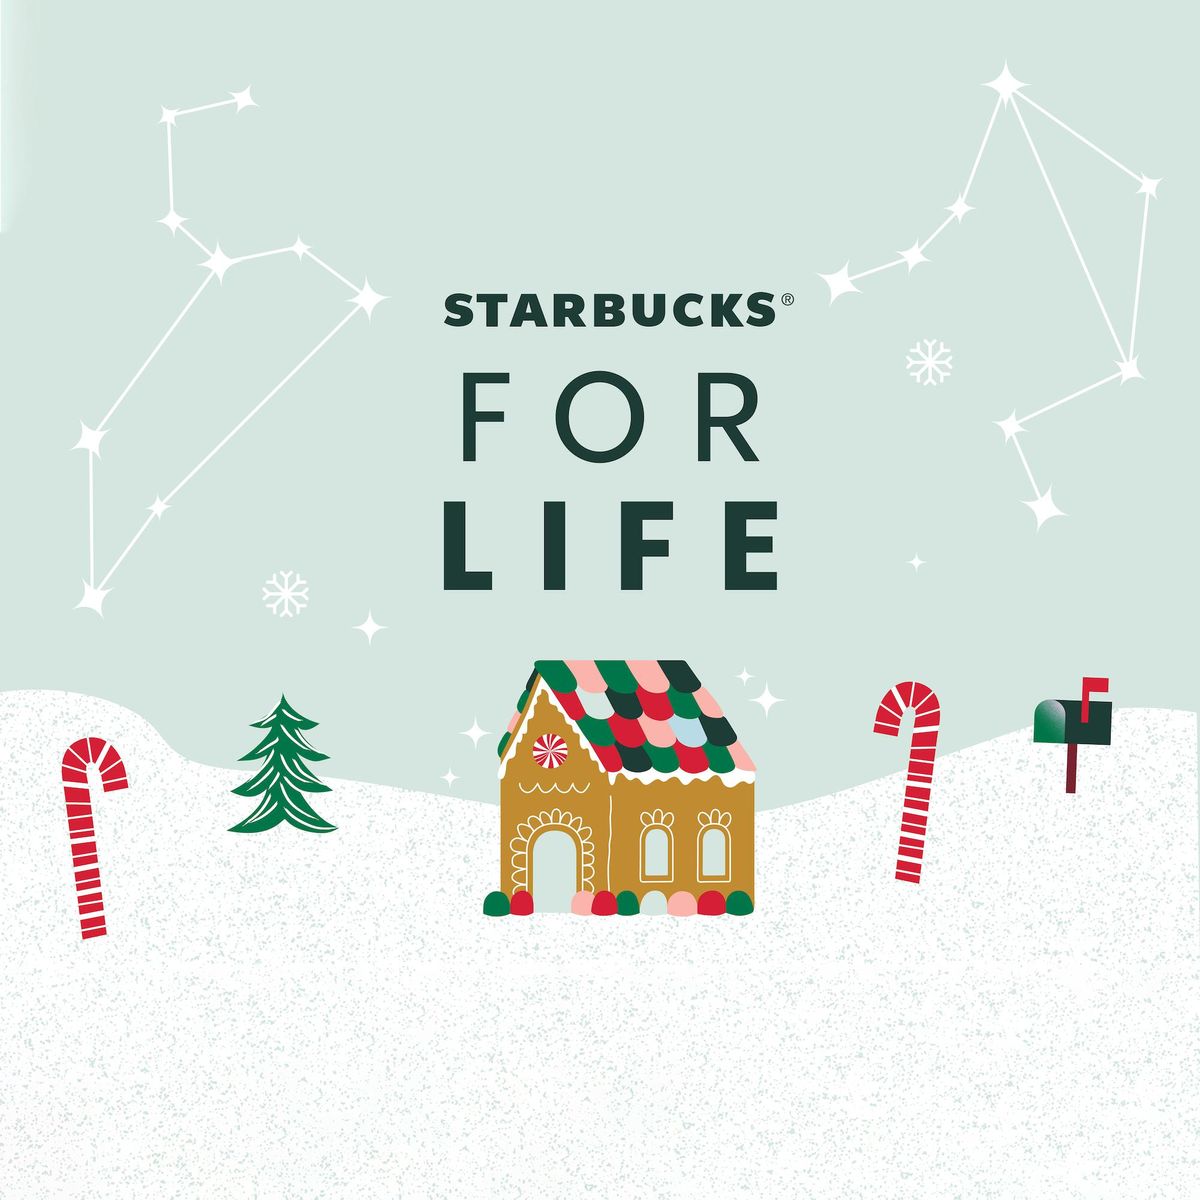 Your Go-To Starbucks Drink This Holiday Season, Based On Your Zodiac Sign